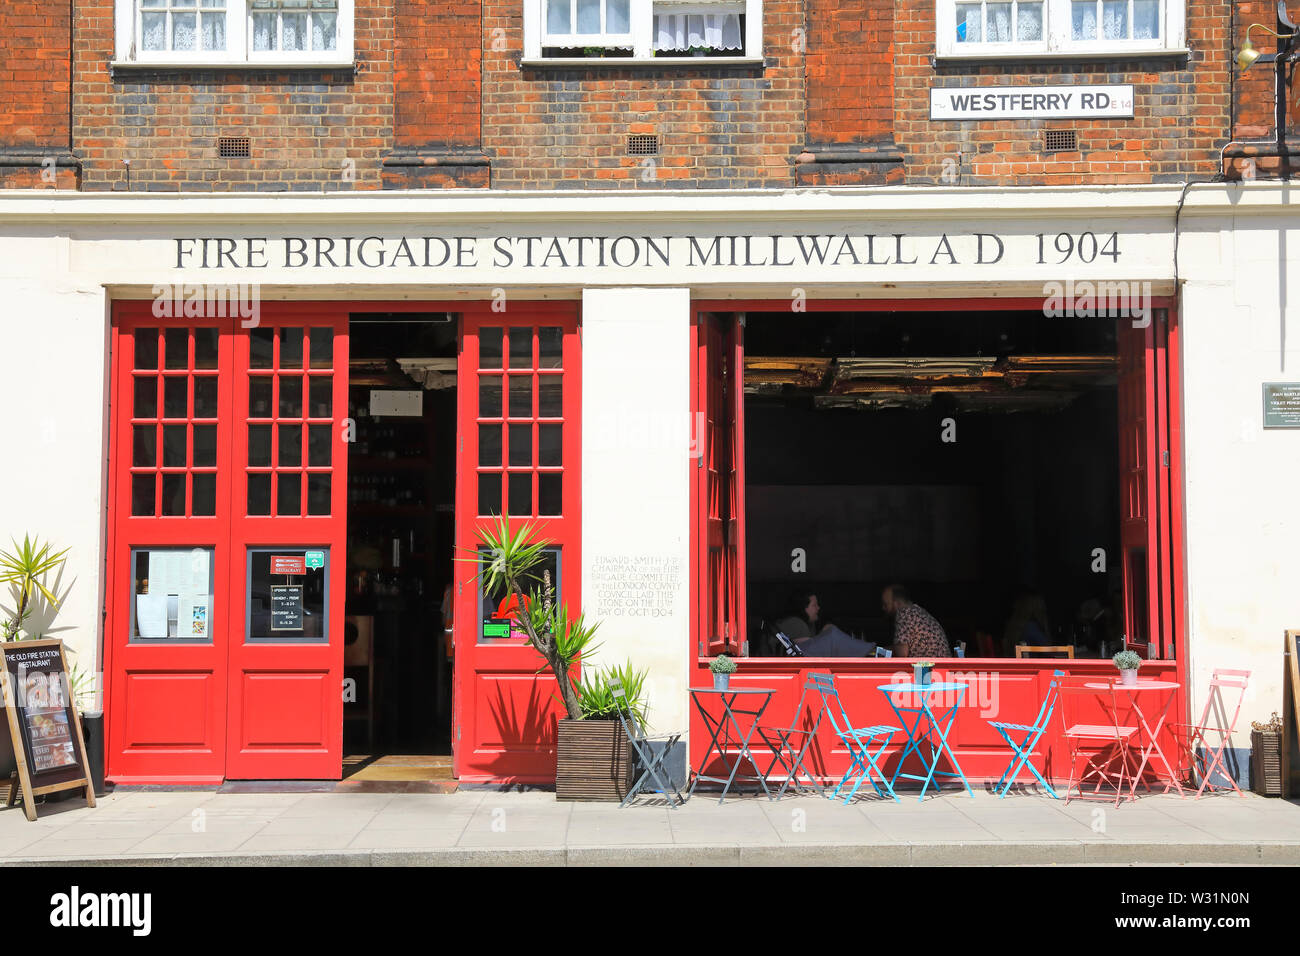 The Old Millwall Fire Station restaurant, serving Turkish food, on Westferry Road, on the Isle of Dogs, east London, UK Stock Photo